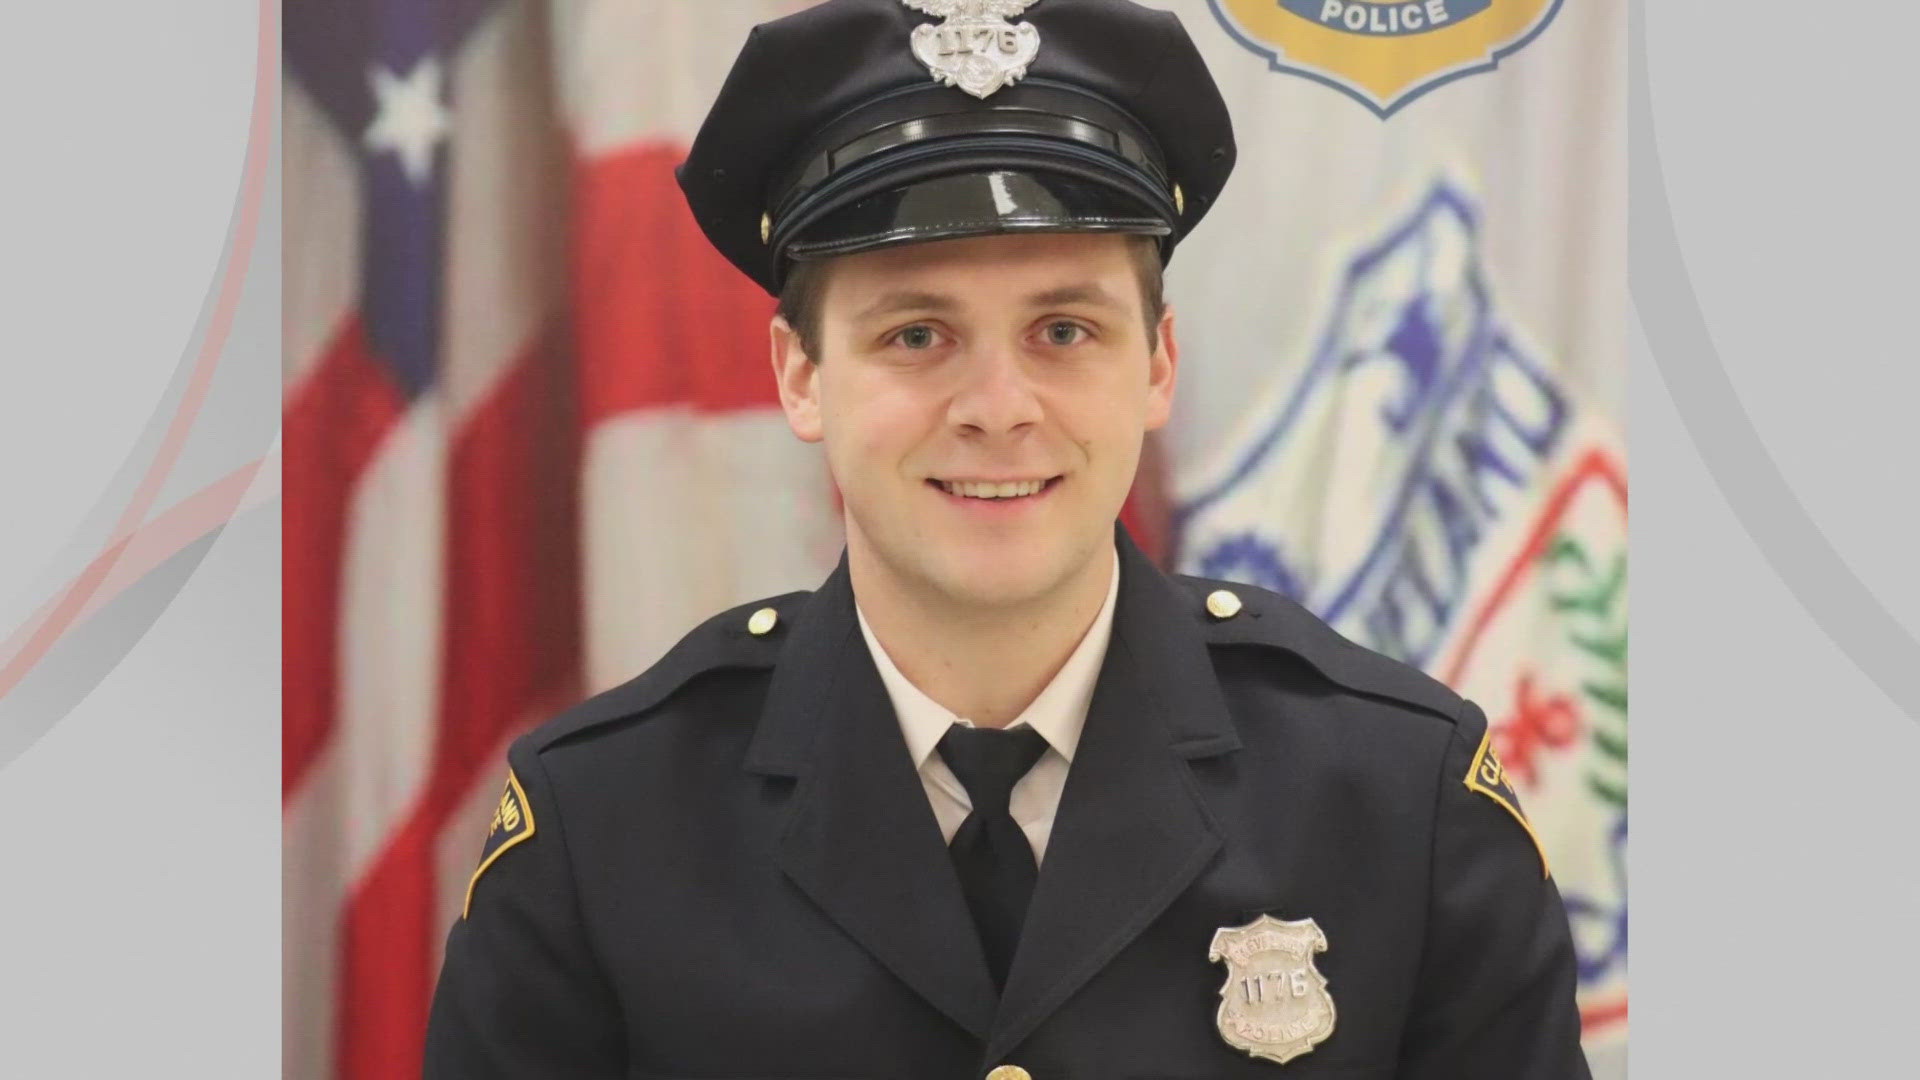 Ritter was an officer with the Cleveland Division of Police for four years. The native of Webster, New York, was fatally shot in the line of duty.